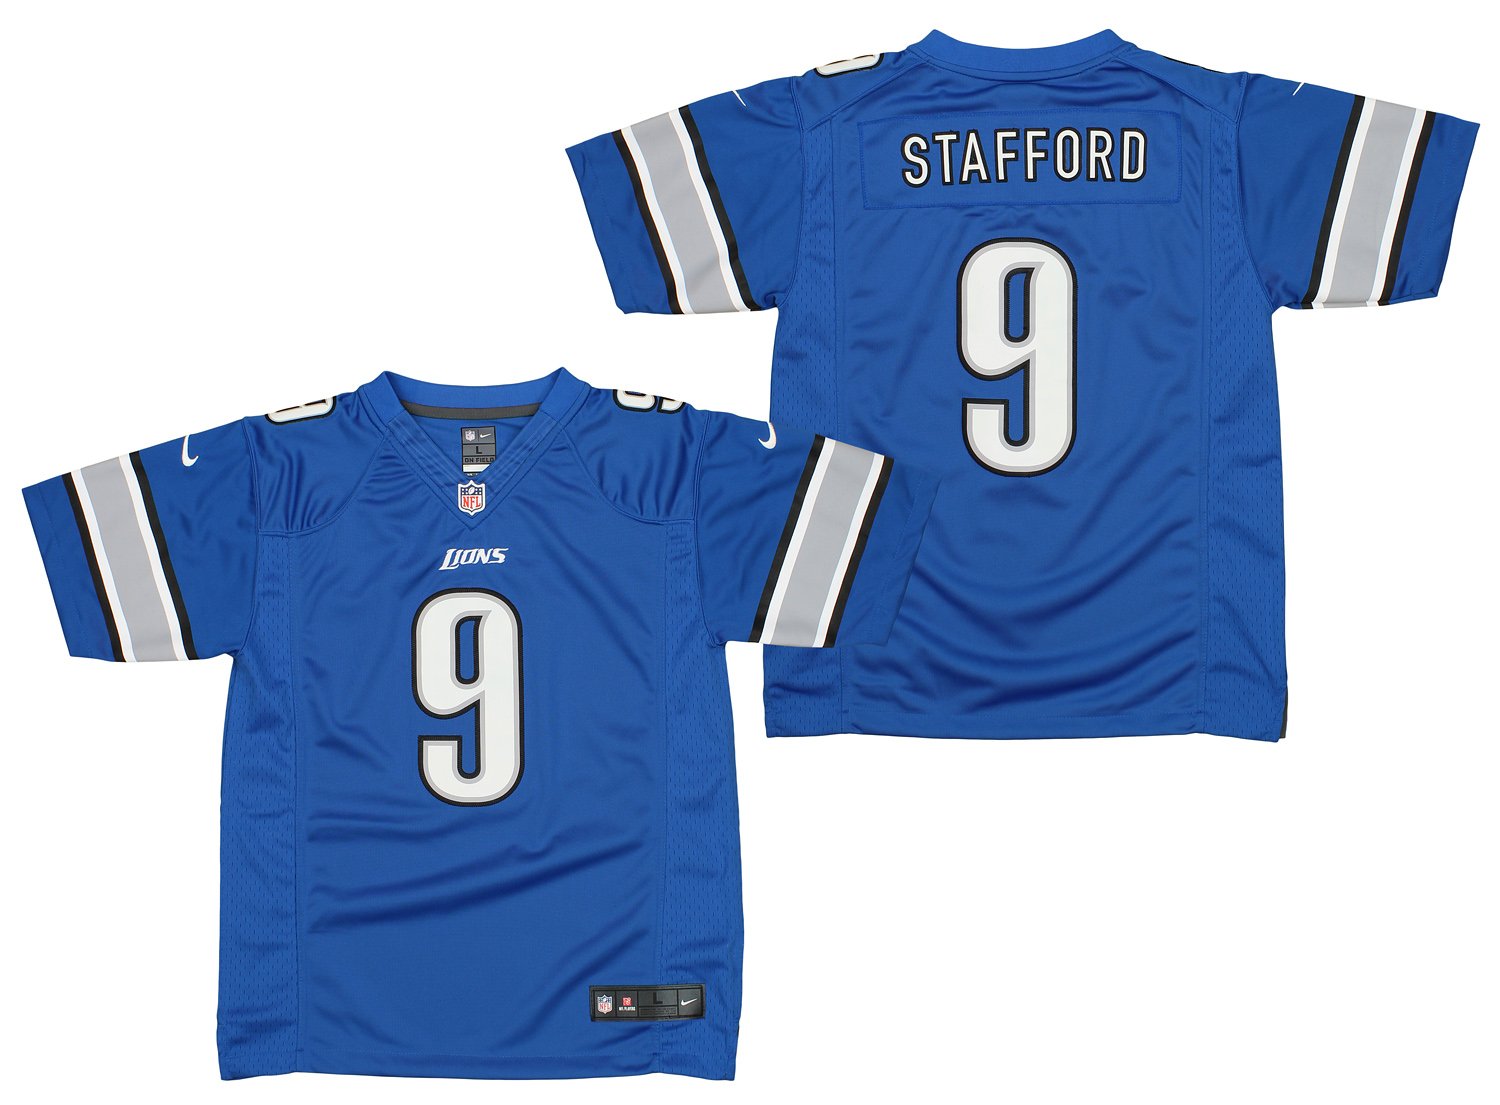 Stafford #9 Detroit Lions Youth Jersey - Vintage Detroit Collection